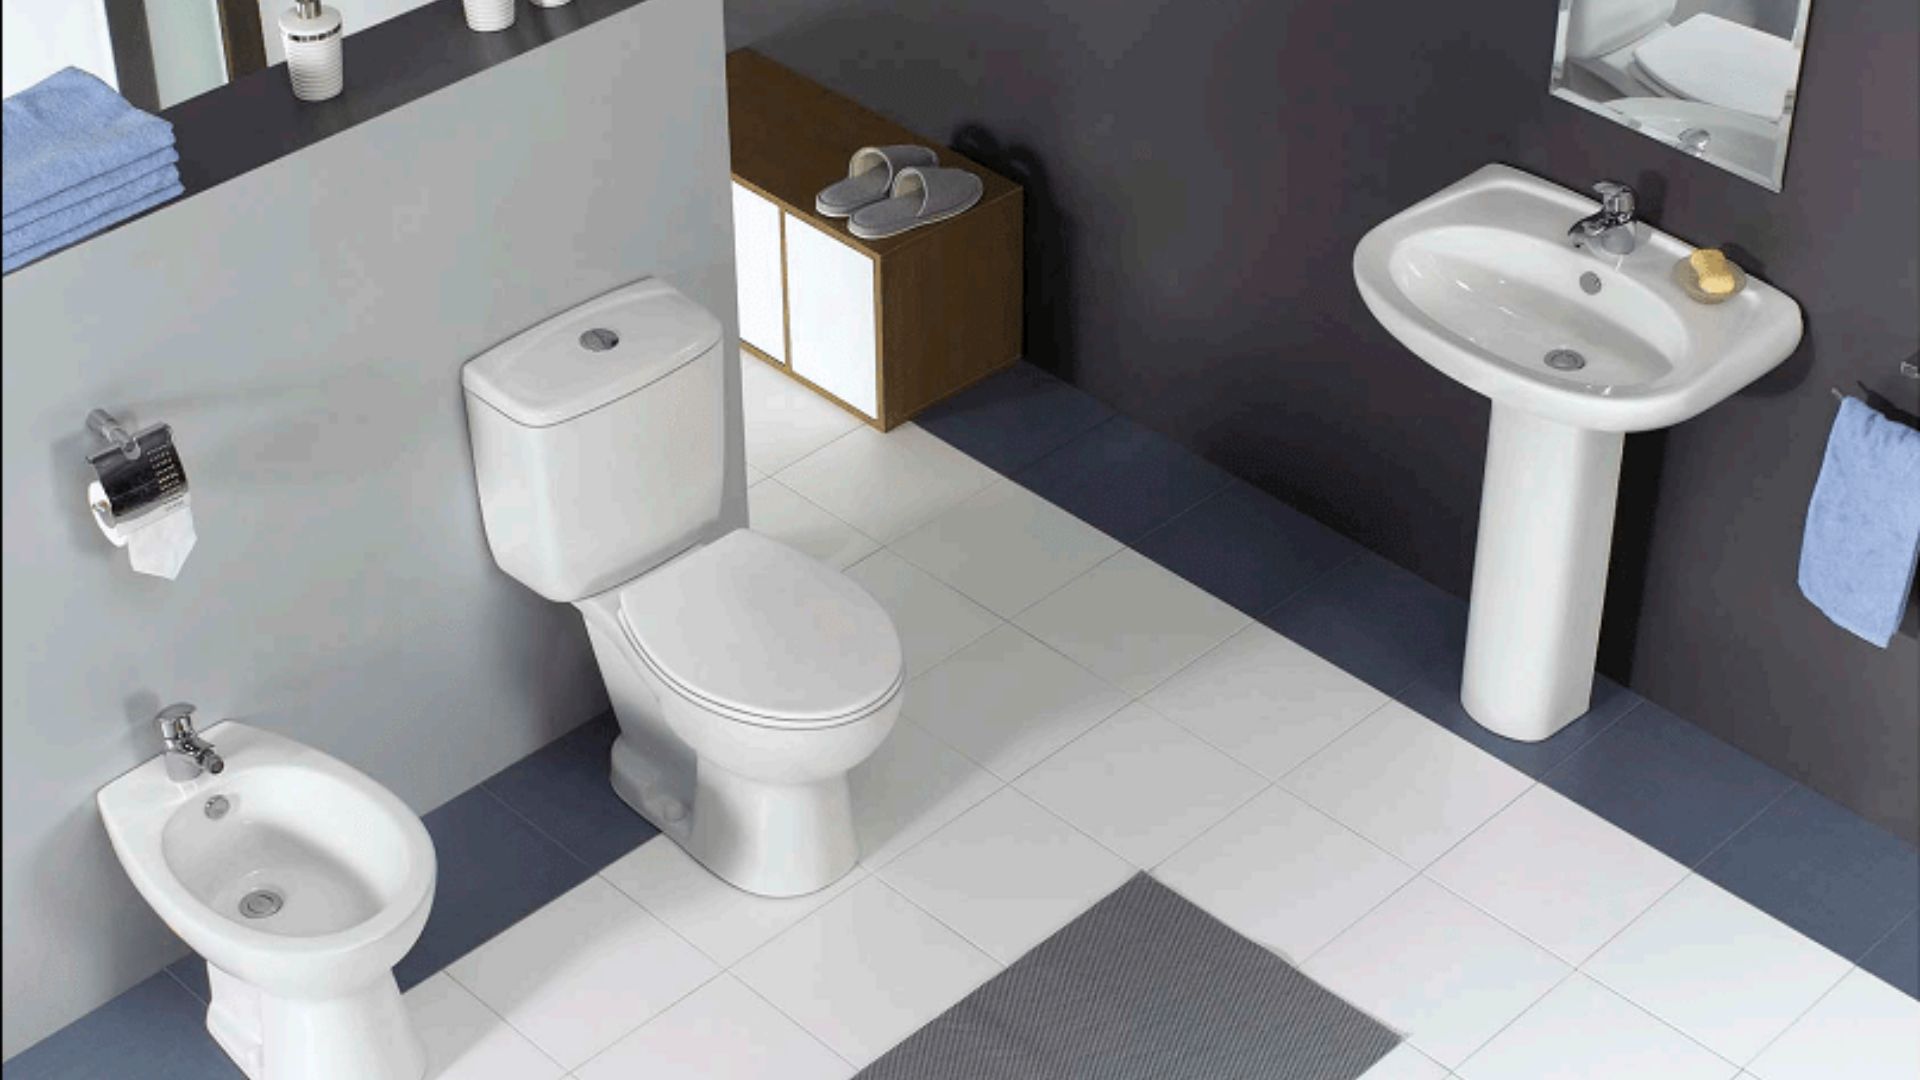 Step-by-Step Sanitary Wares Selection